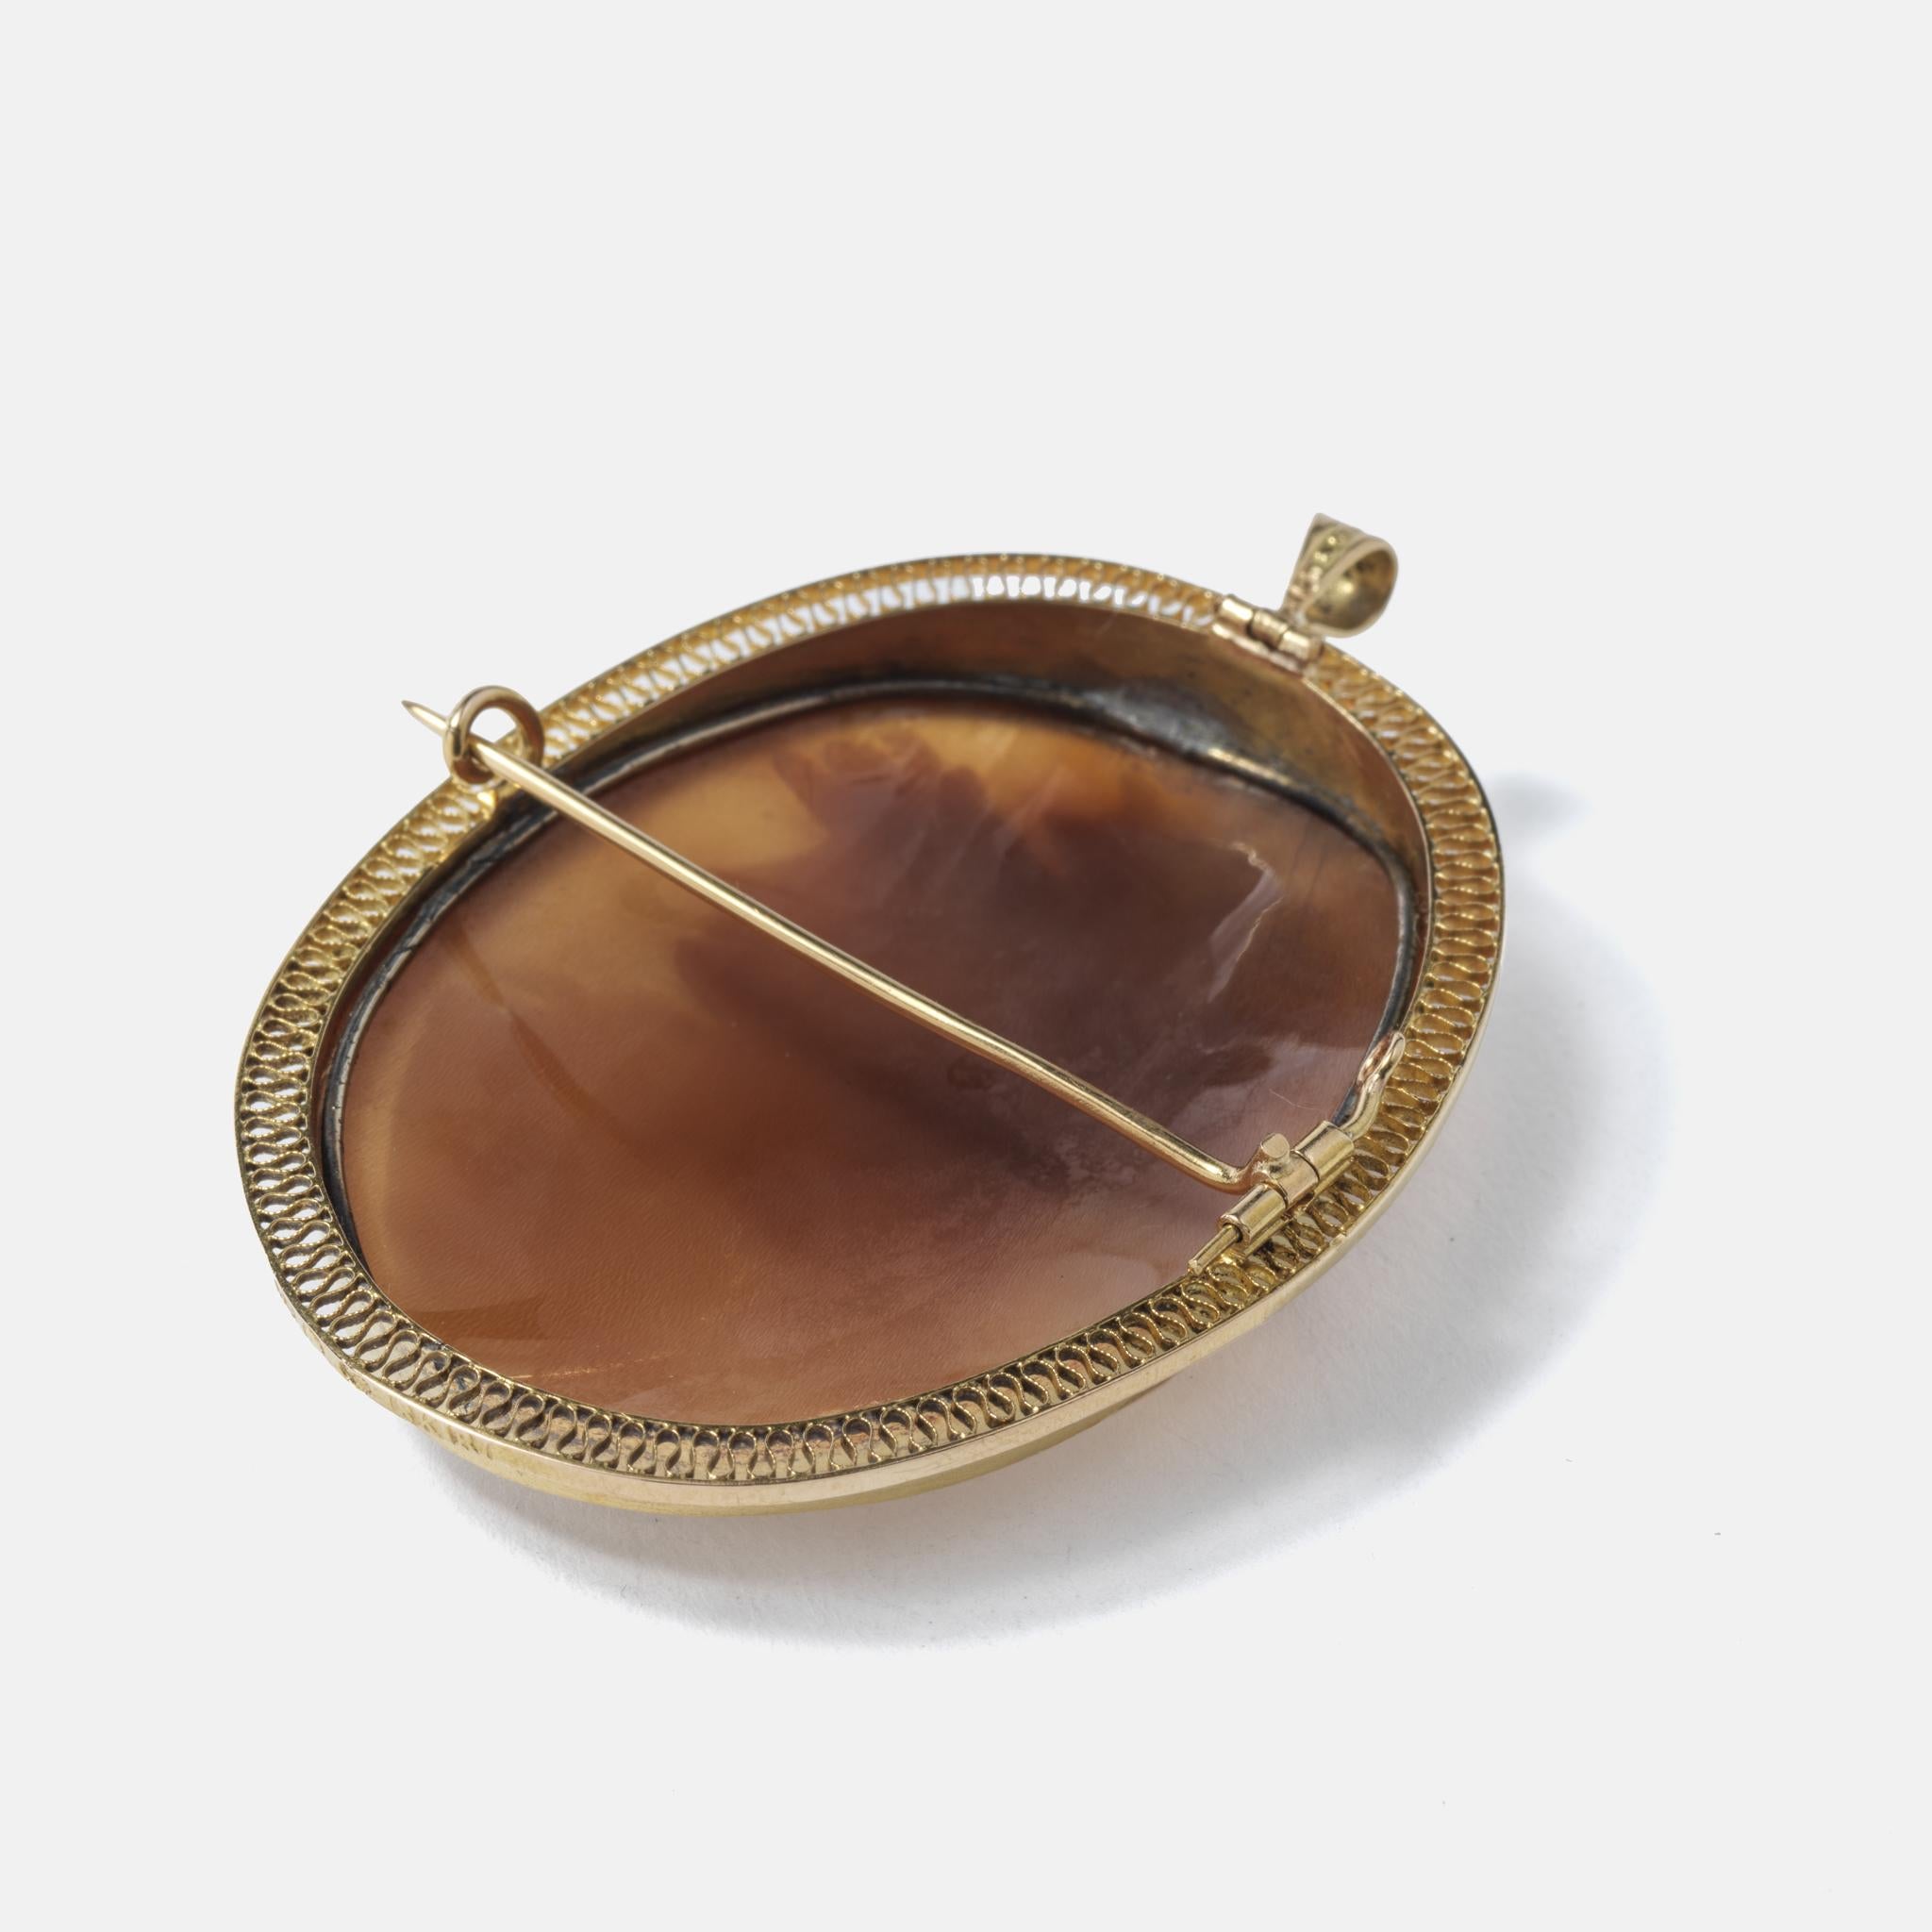 Antique brooch/pendant. 18k gold with a shell cameo made 1919 in Sweden For Sale 1